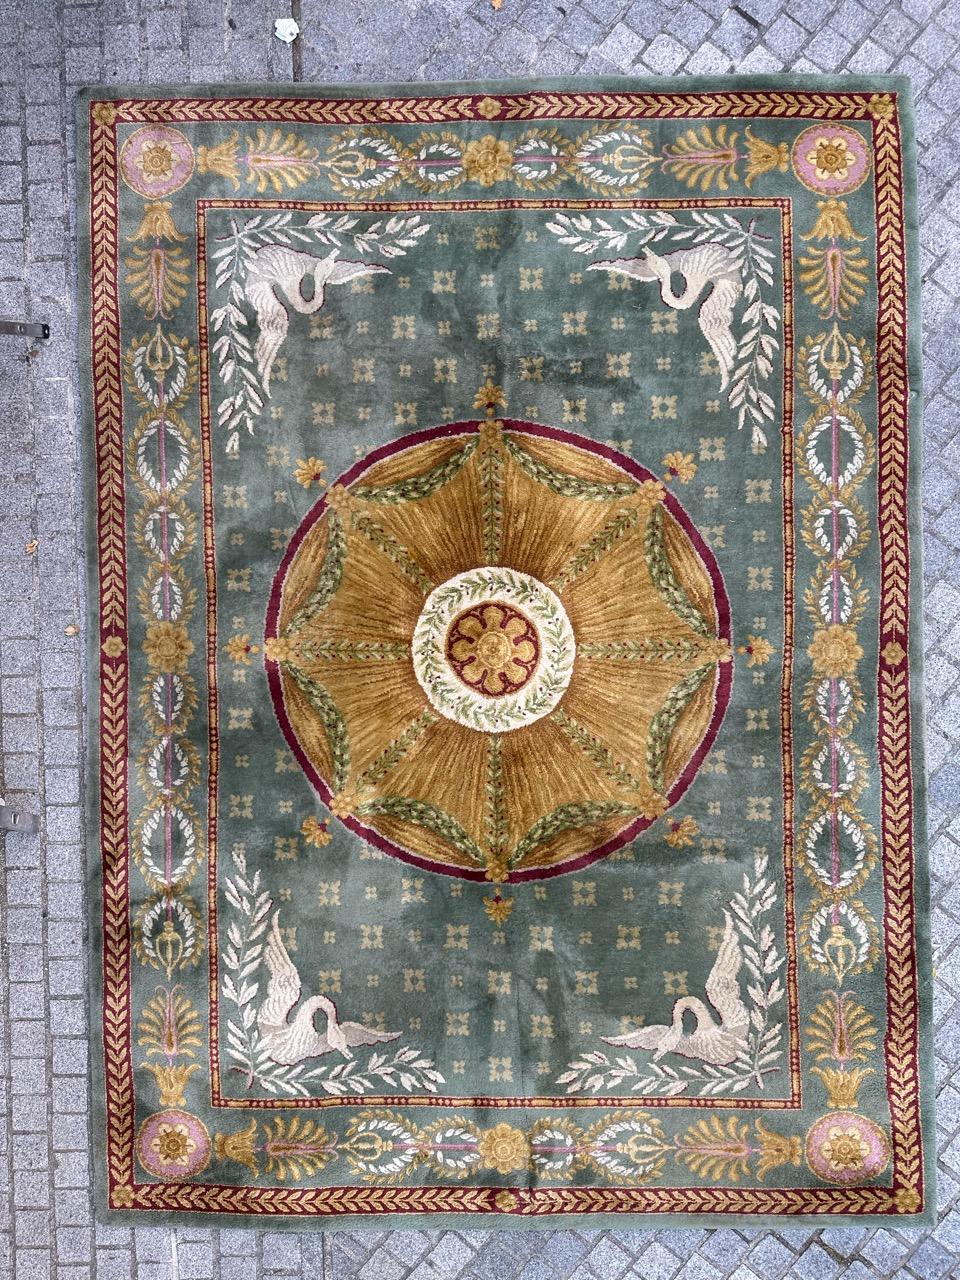 Exquisite large vintage Savonnerie palace rug in the elegant Louis XVI style. This masterpiece features a lush design with a green field, striking yellow and red accents. Meticulously hand-knotted with wool velvet on a sturdy cotton foundation by